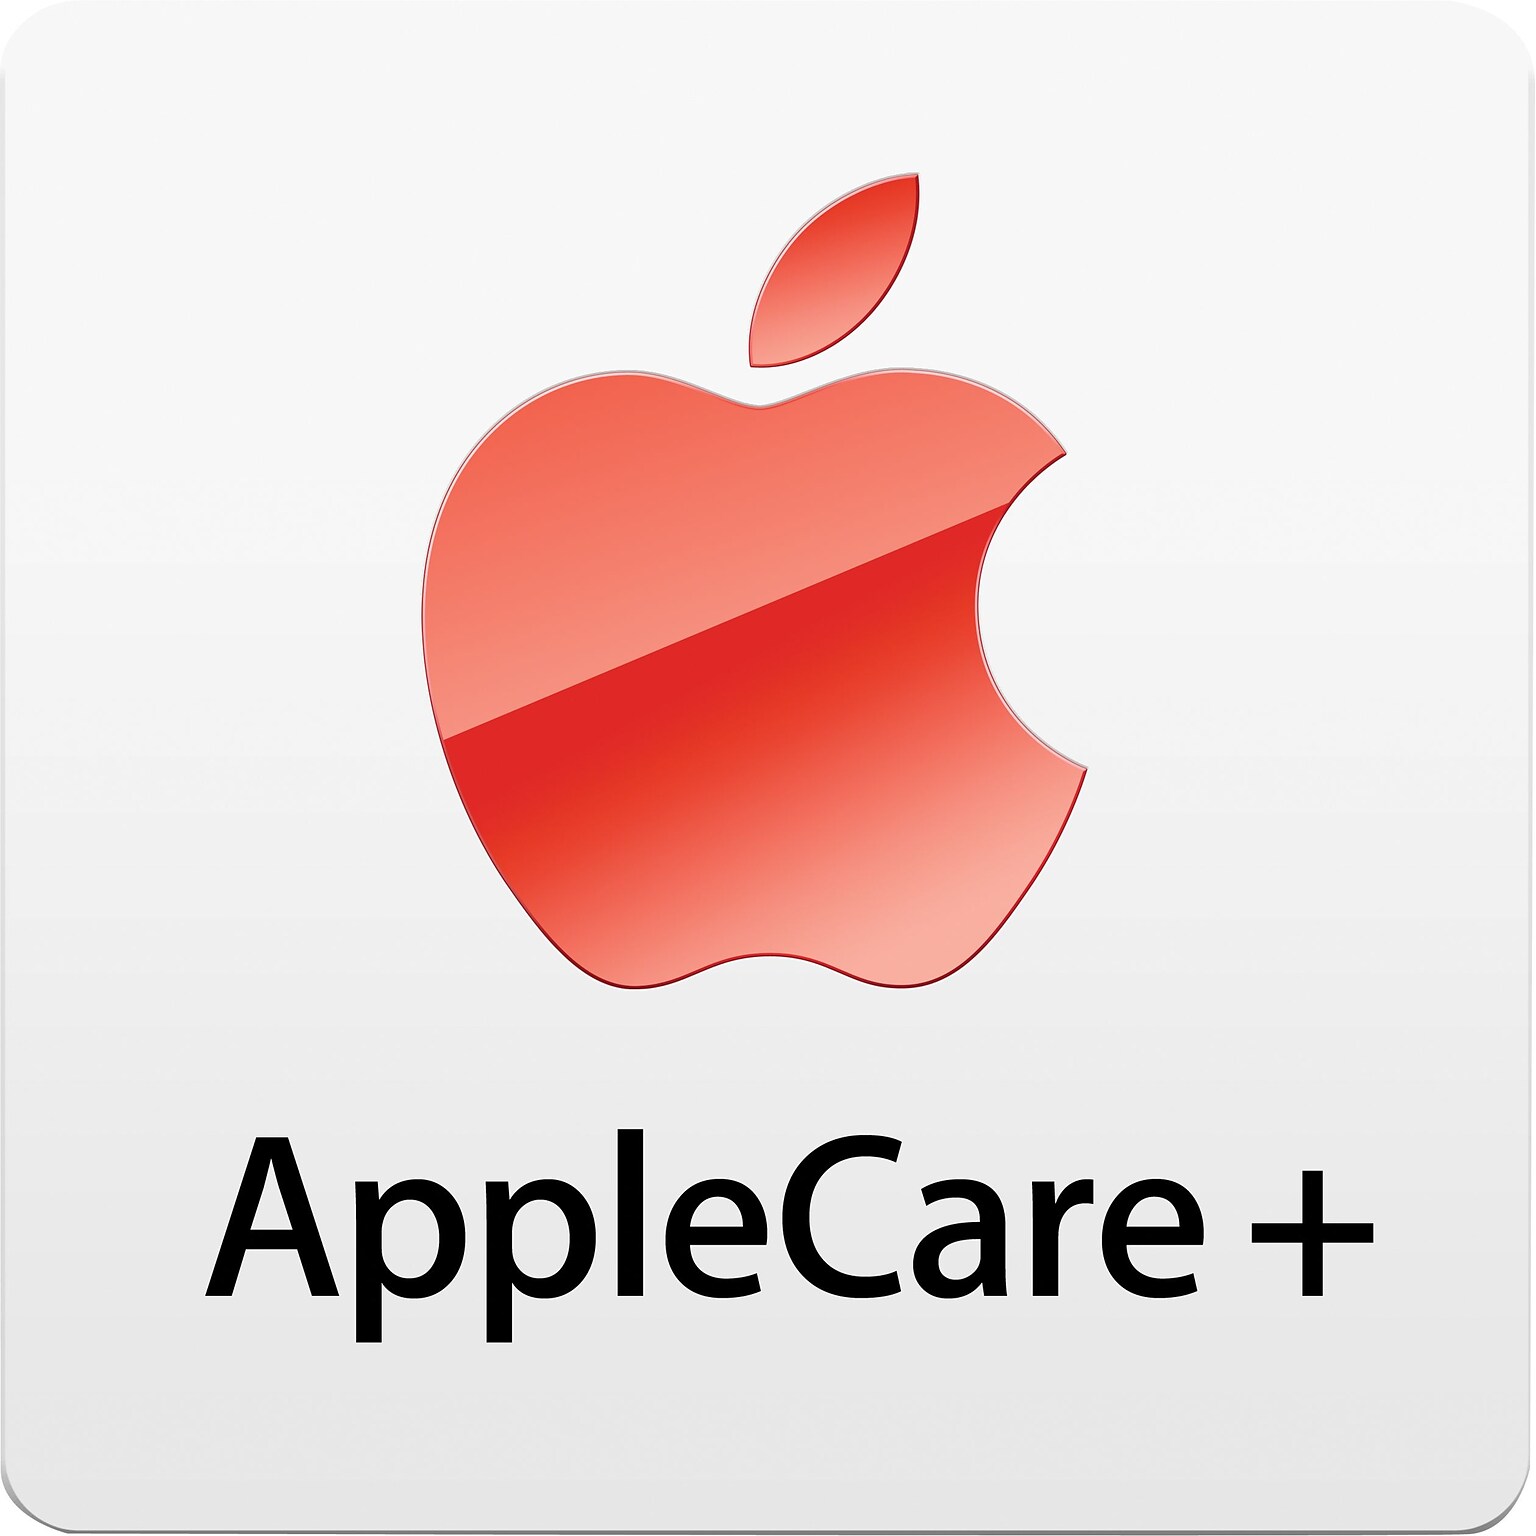 AppleCare+ 2-year Protection Plan for iPad Air with Retina Display, Wi-Fi + Cellular (Verizon Wireless) 32B, Silver